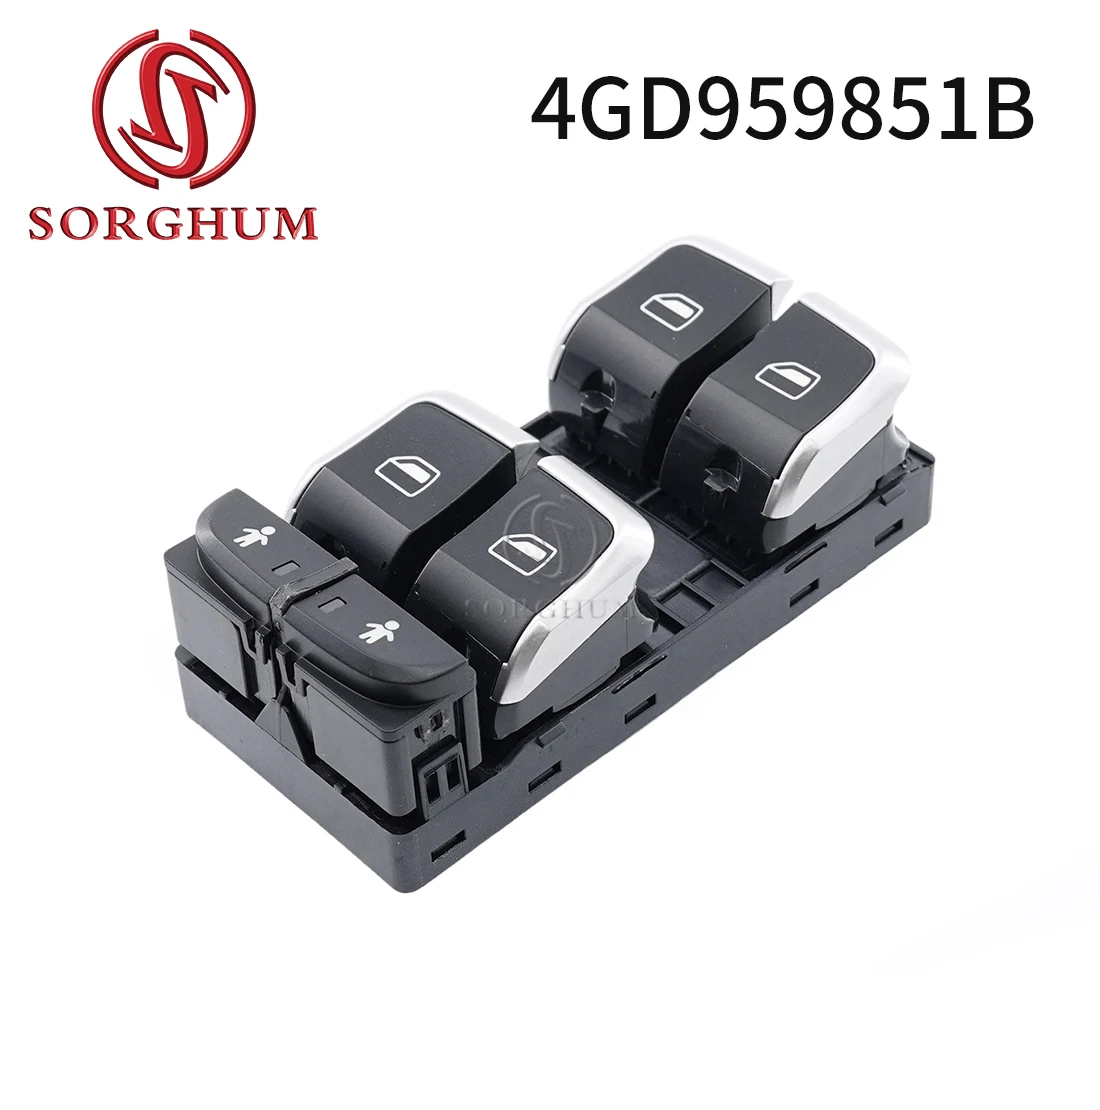 

Sorghum 4GD959851B New Driver Window Lifter Control Master Switch Buton For Audi A6 S6 C7 A7 Q3 TT RS6 S8 R8 RS7 RSQ3 4GD959851